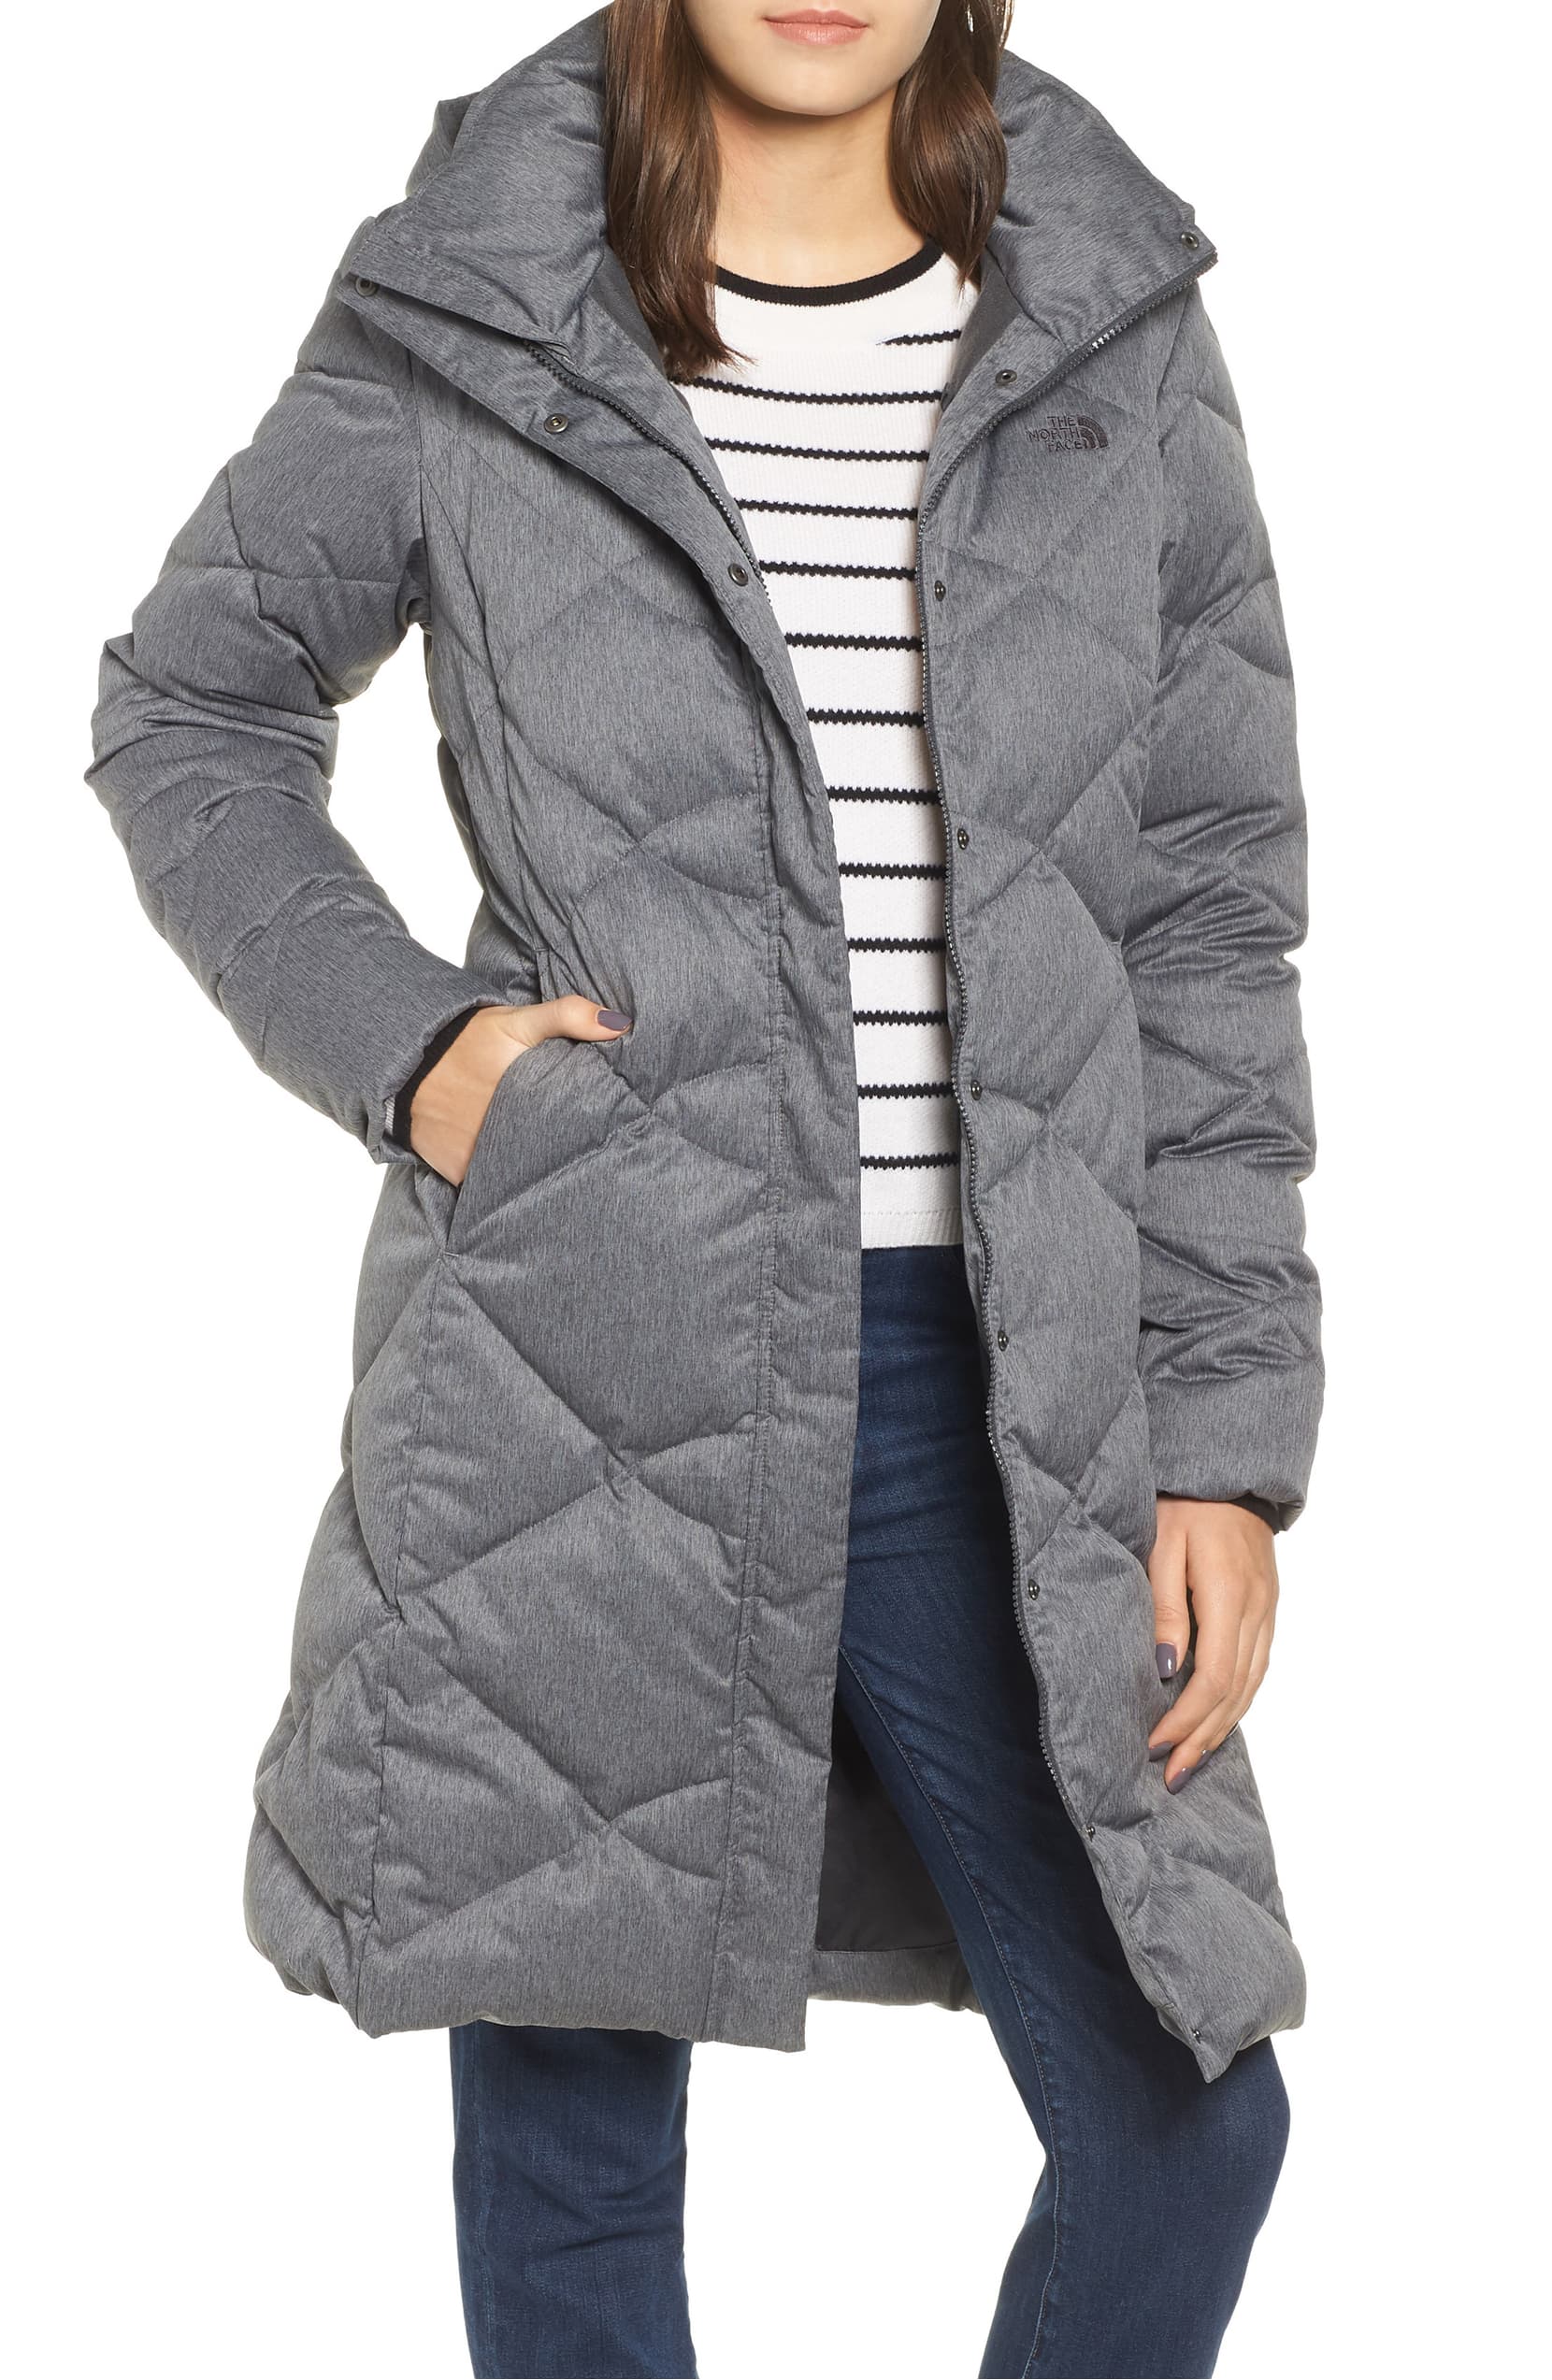 So Many North Face Jackets Are Up to 50% Off at Nordstrom — Selling ...